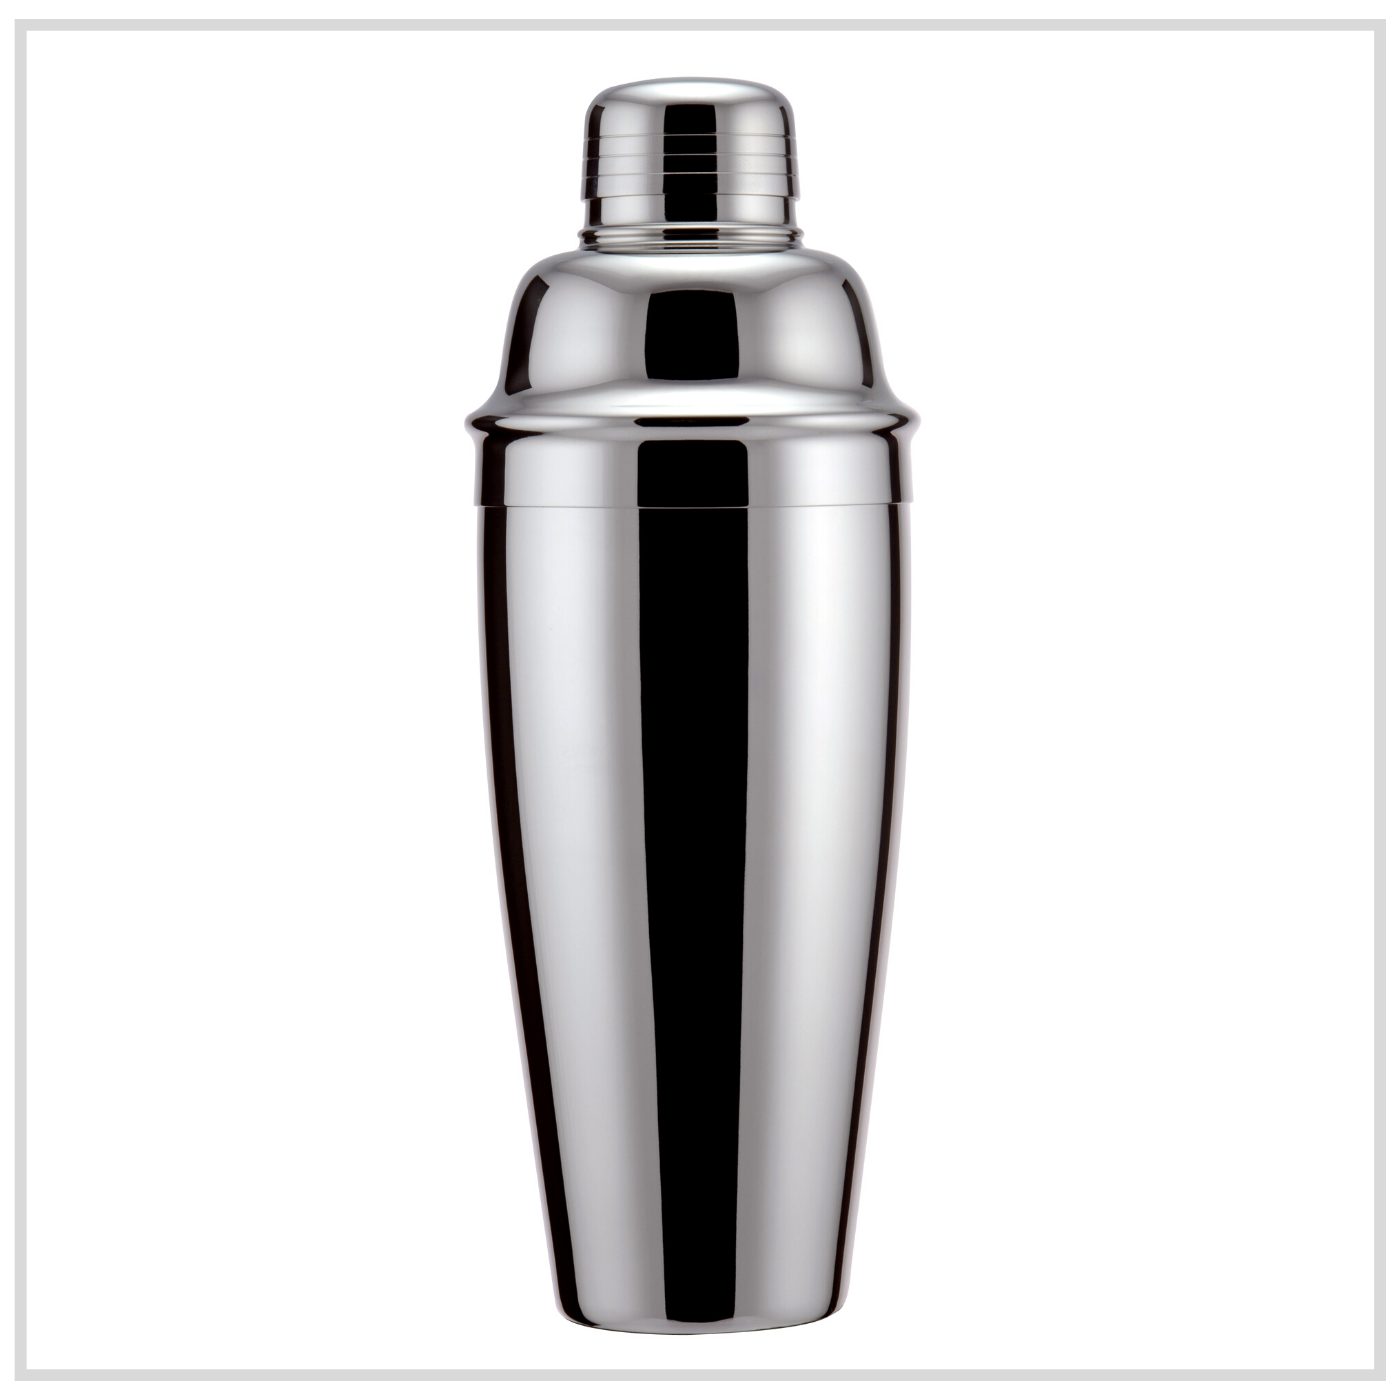 Ilsa Professional Cocktail Shaker - Stainless Steel - 500ml